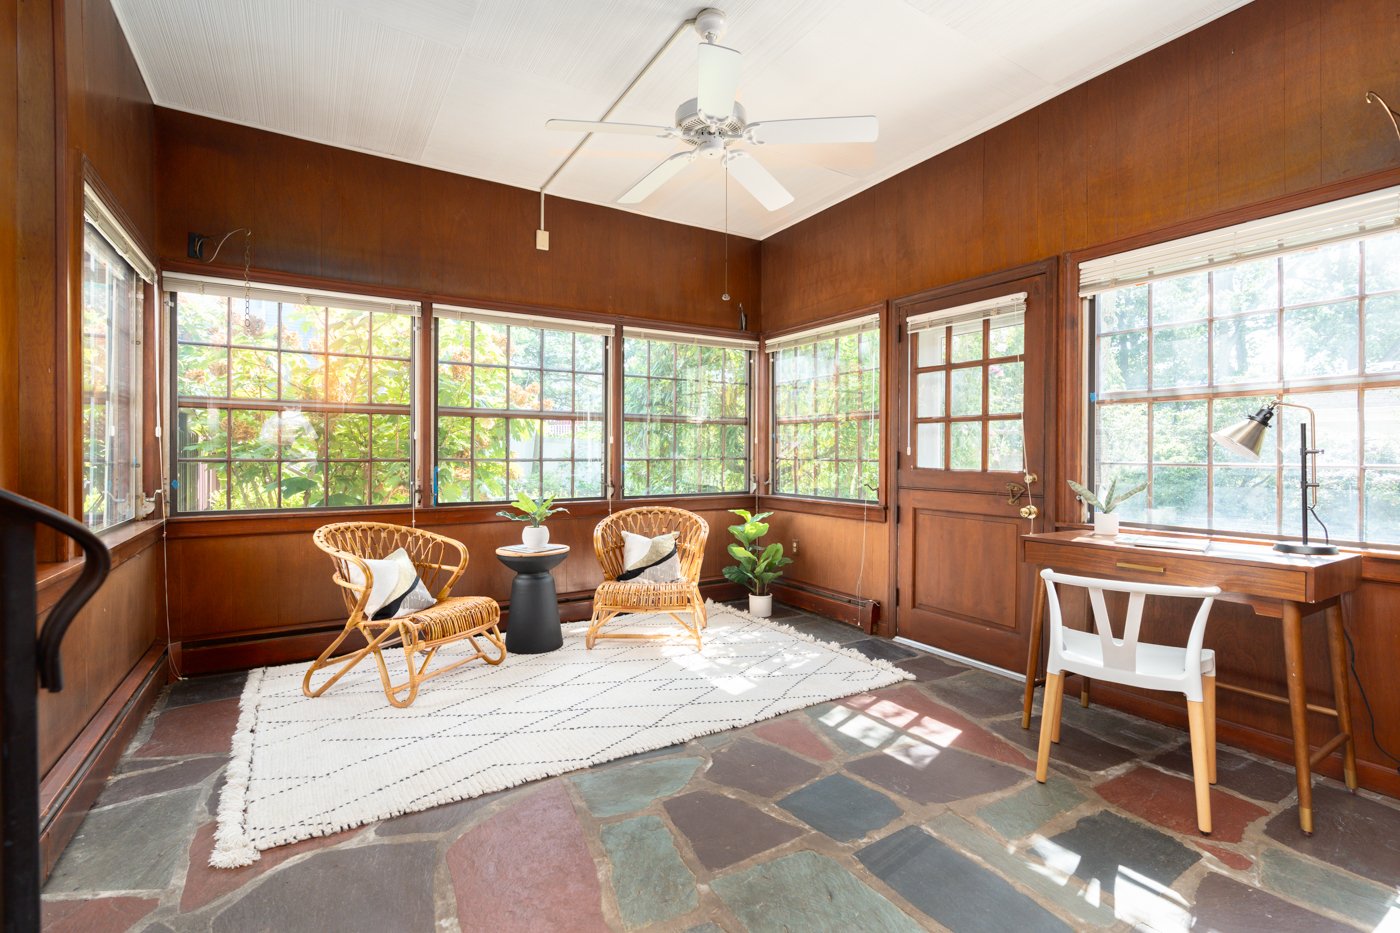 SUNROOM 415 Lincoln real estate (Low res)-1.jpg